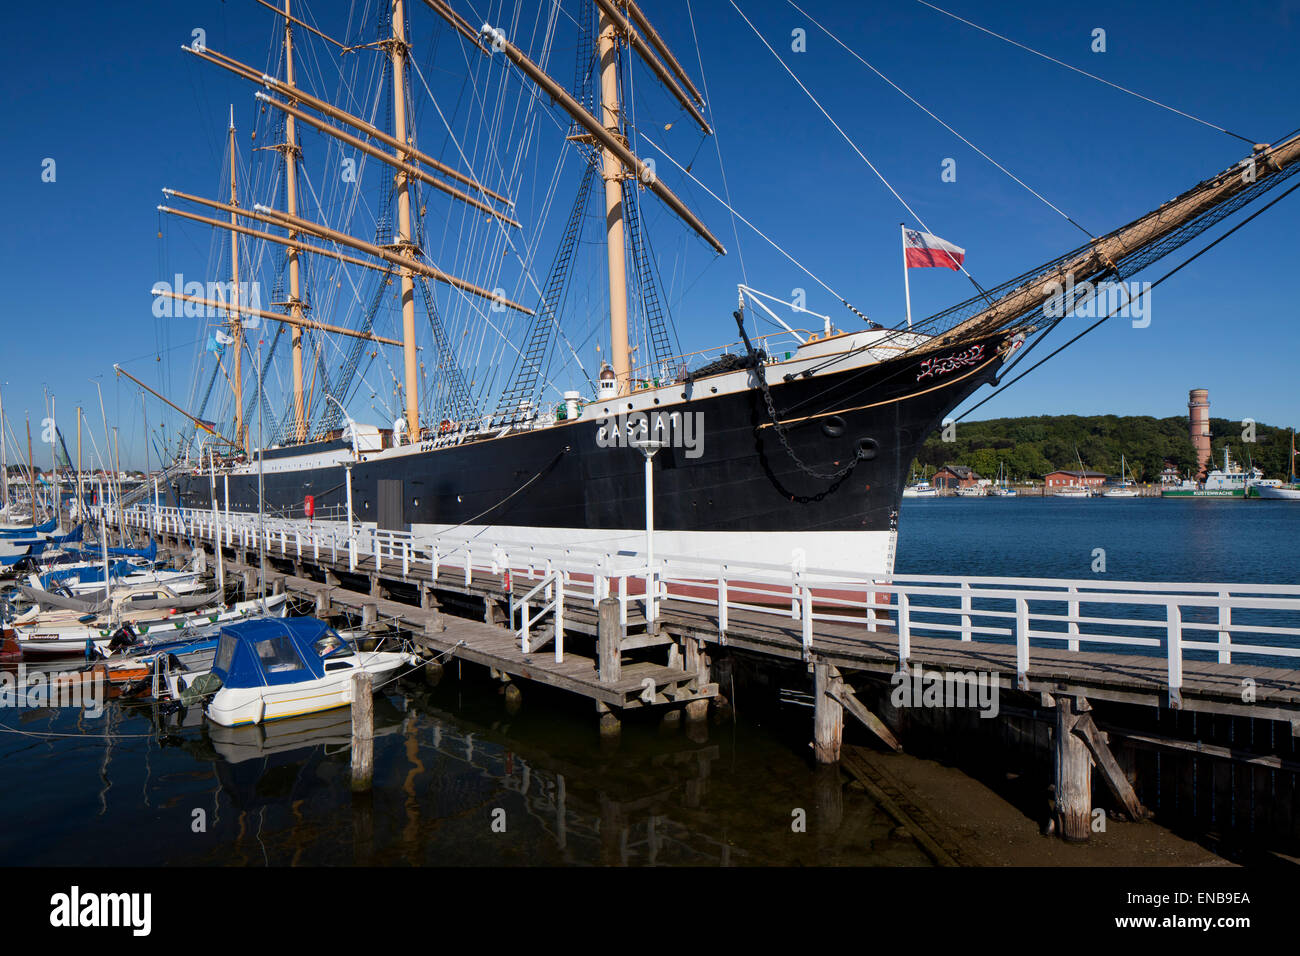 The museum sailing ship Passat, a German four-masted steel barque at Travemünde, Hanseatic town Lübeck, Germany Stock Photo